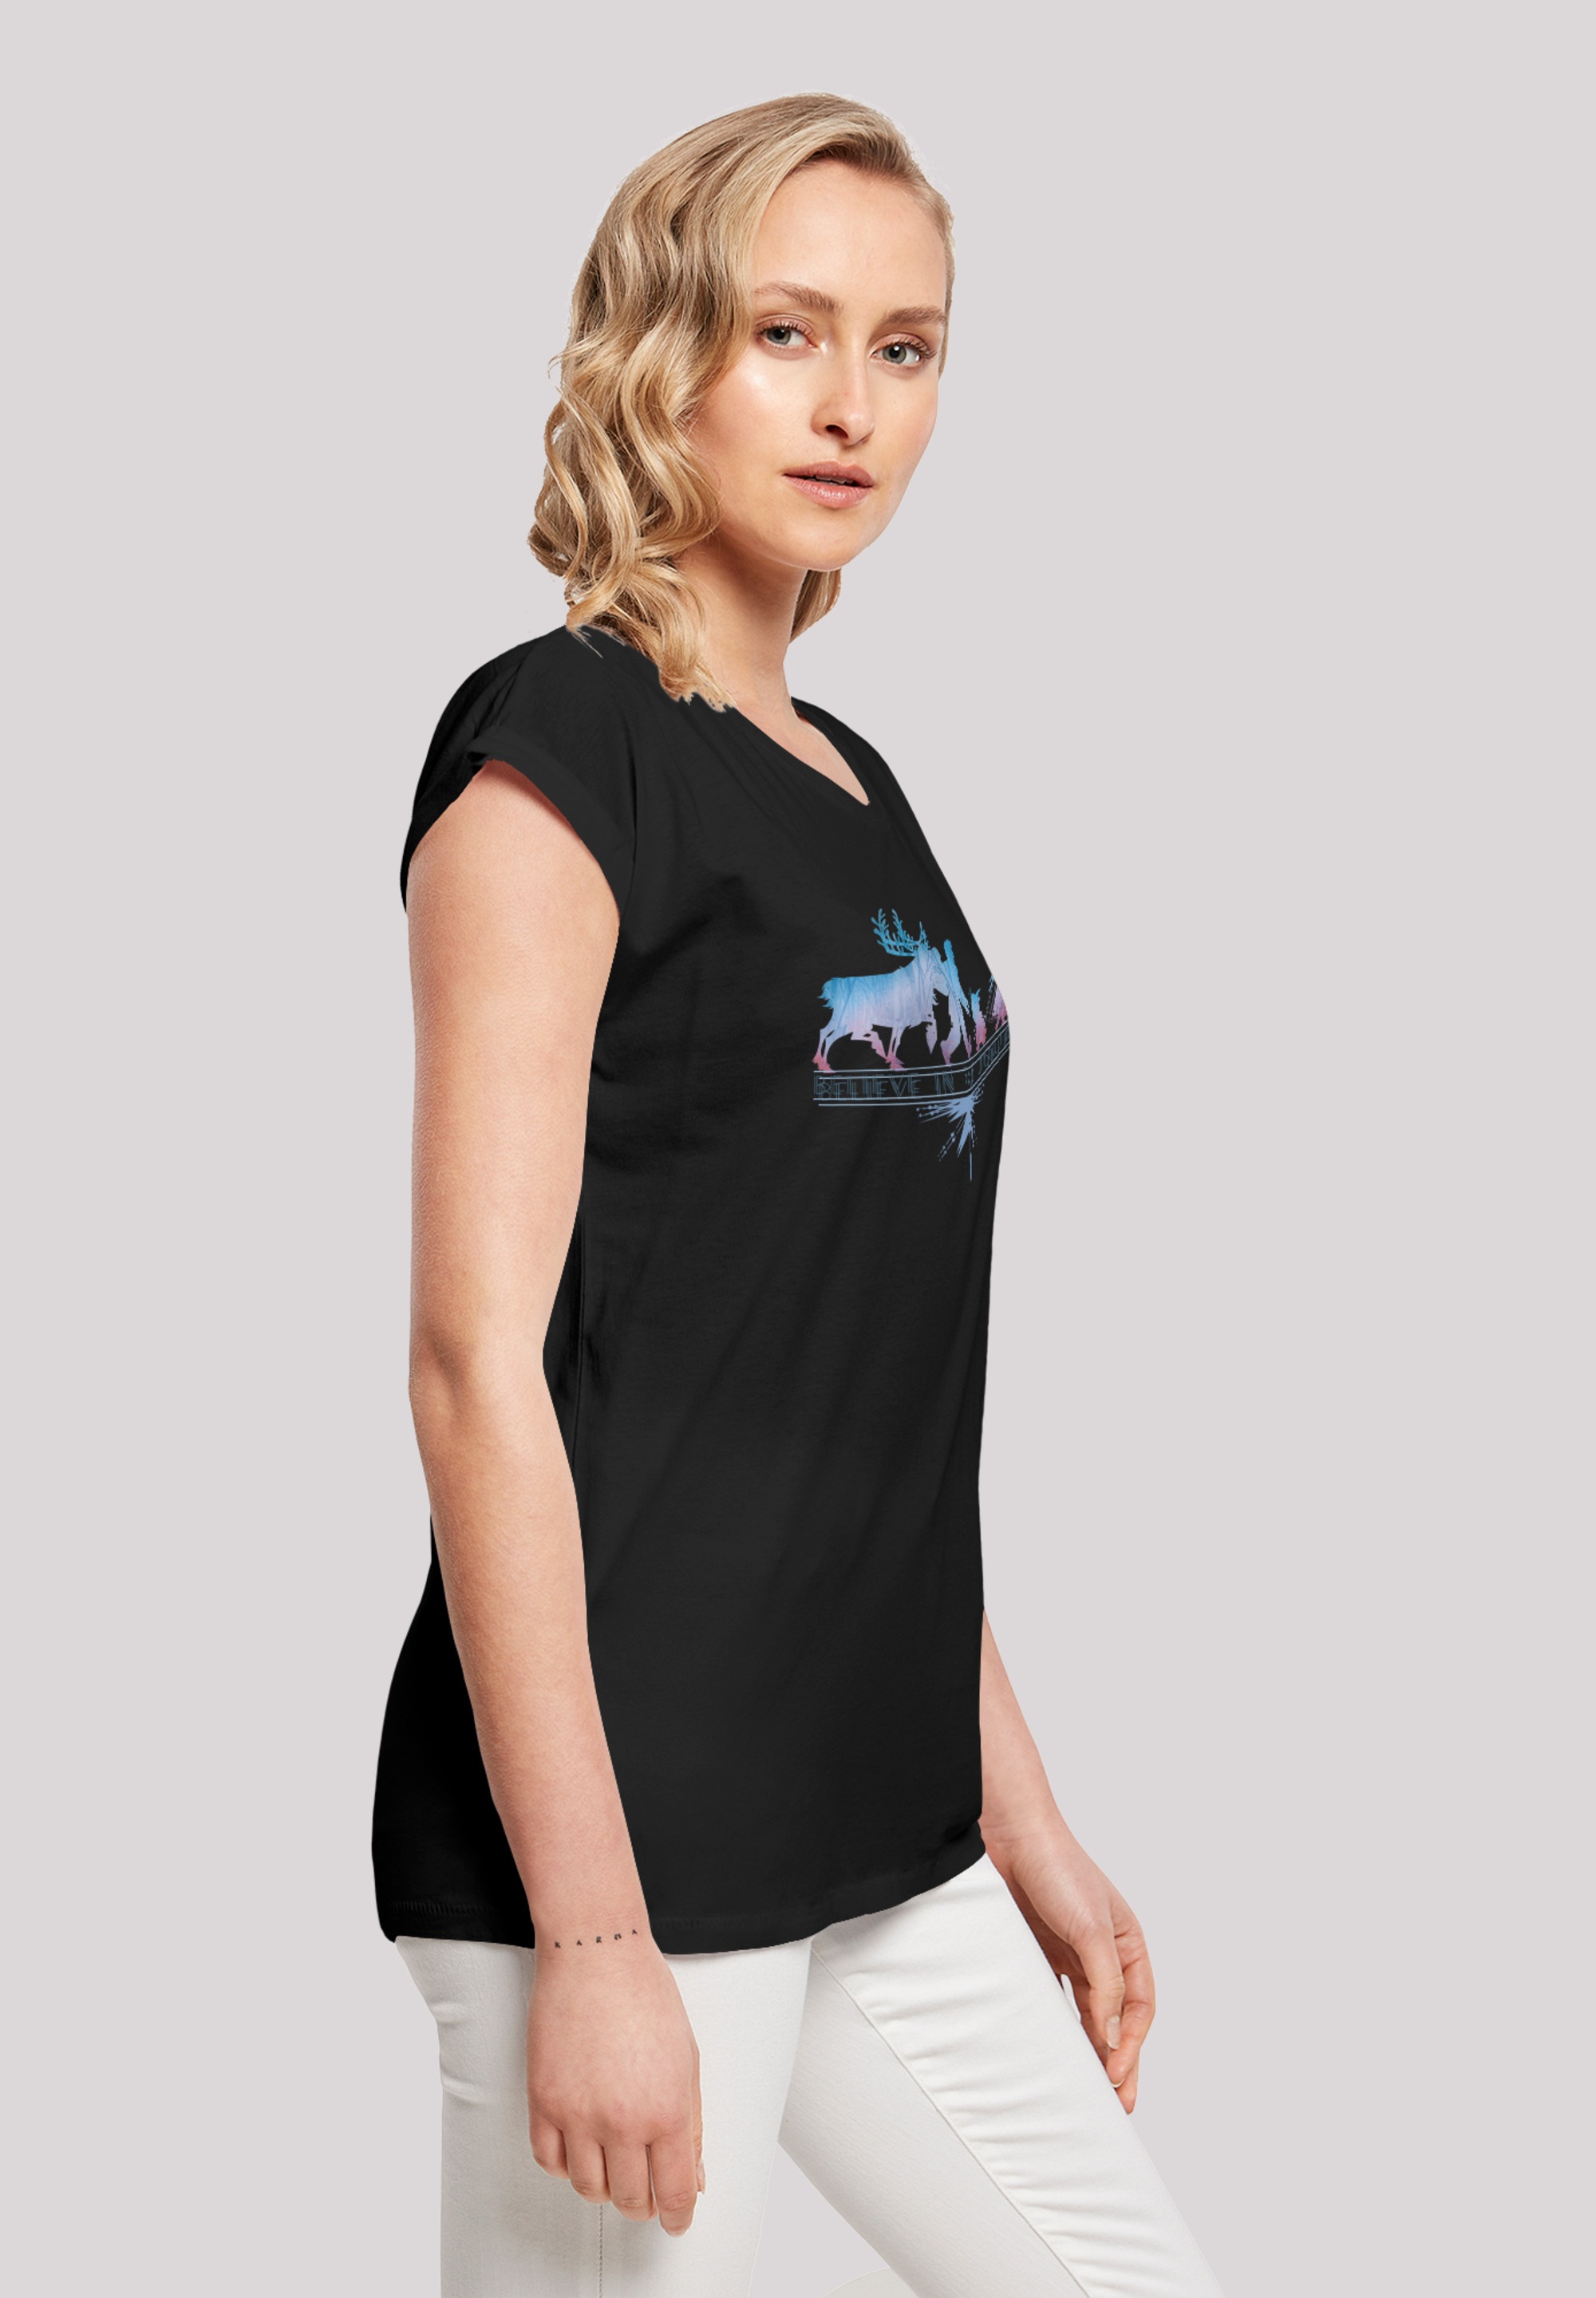 Black Friday F4NT4STIC T-Shirt »Frozen 2 Believe In The Journey'«, Print |  BAUR